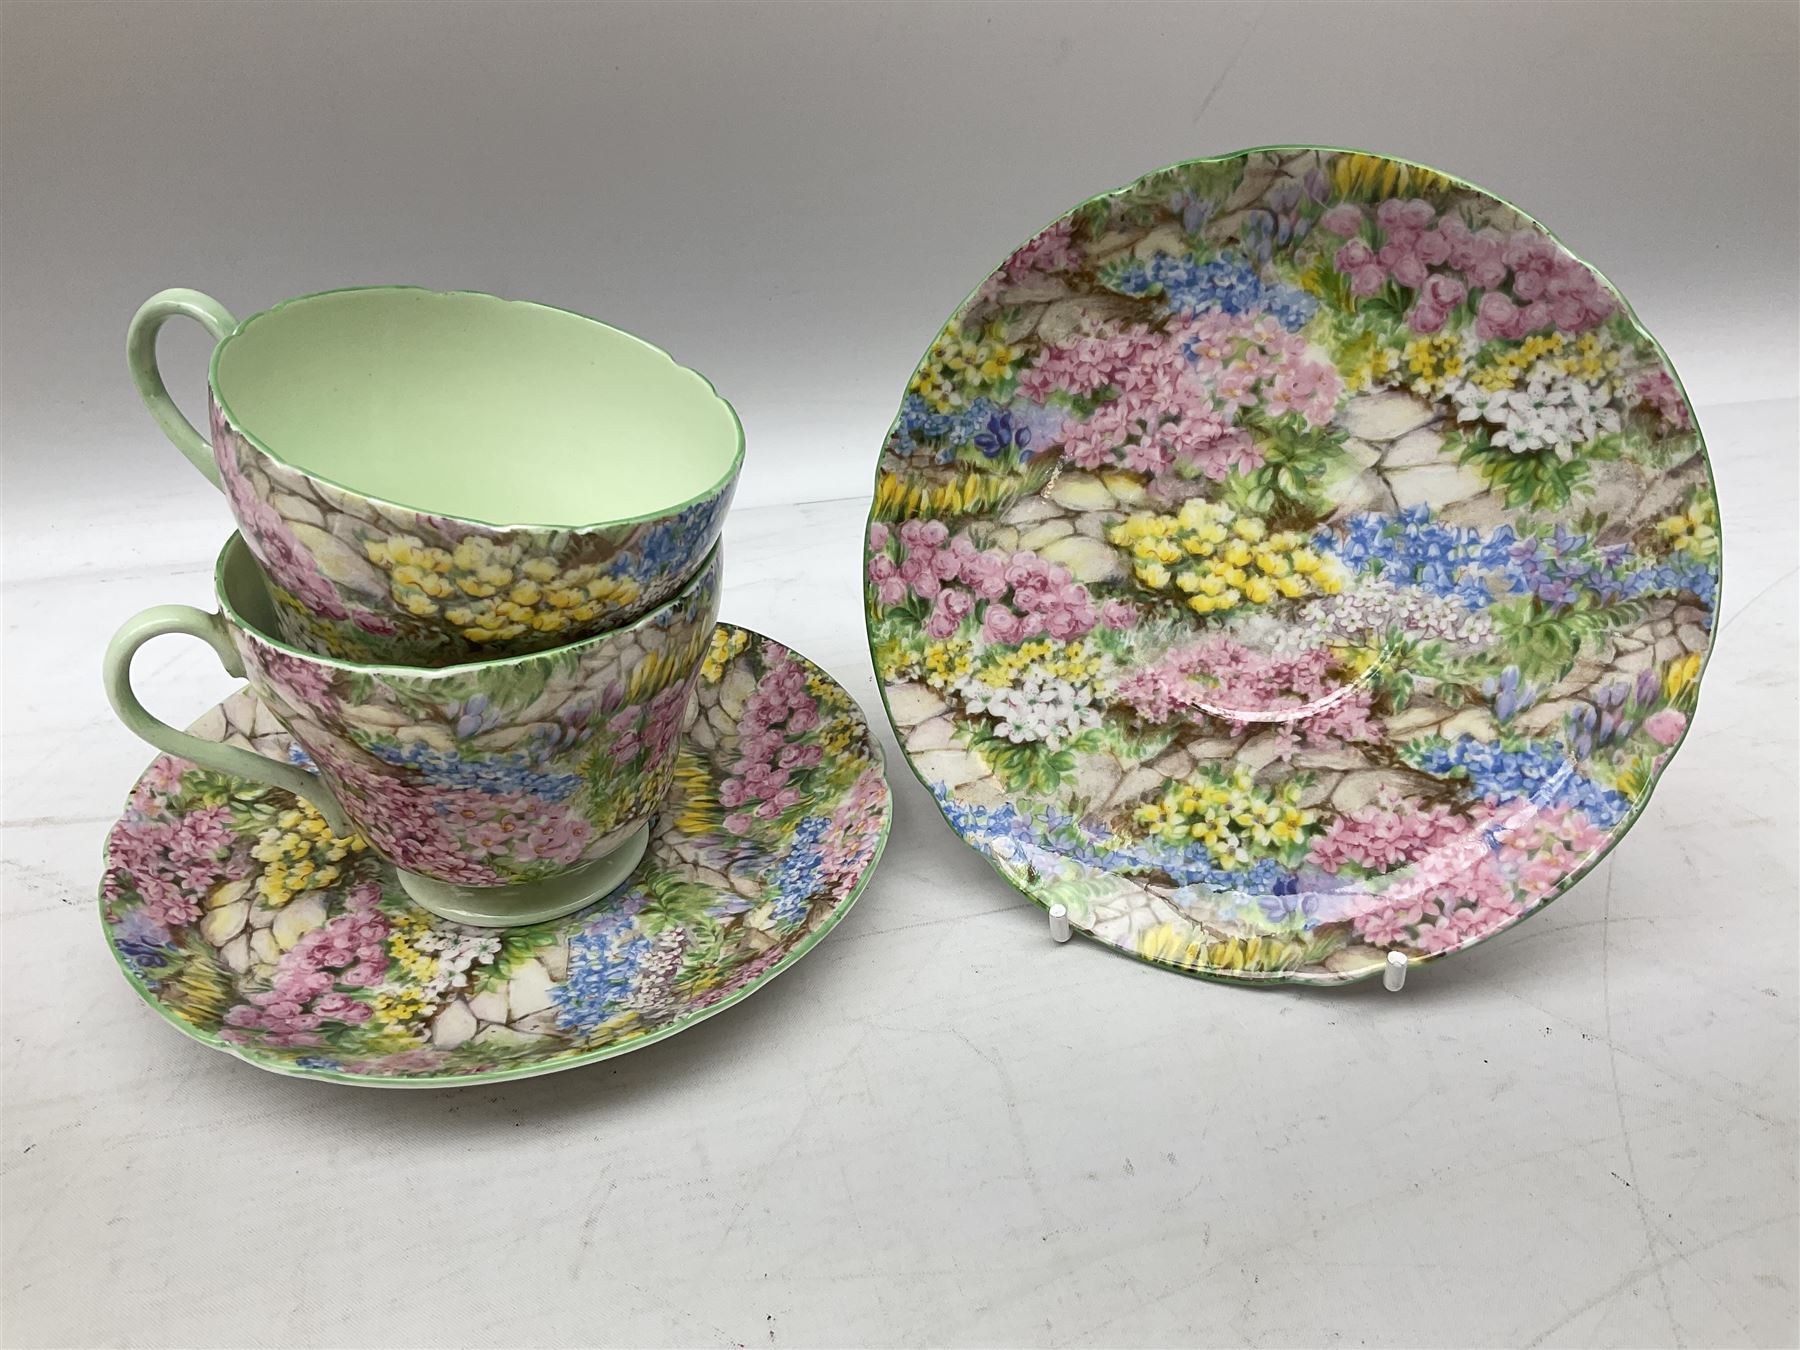 Shelley early morning tea set for two in the 'Rock Garden' pattern No.13454 comprising tea pot and c - Image 4 of 13